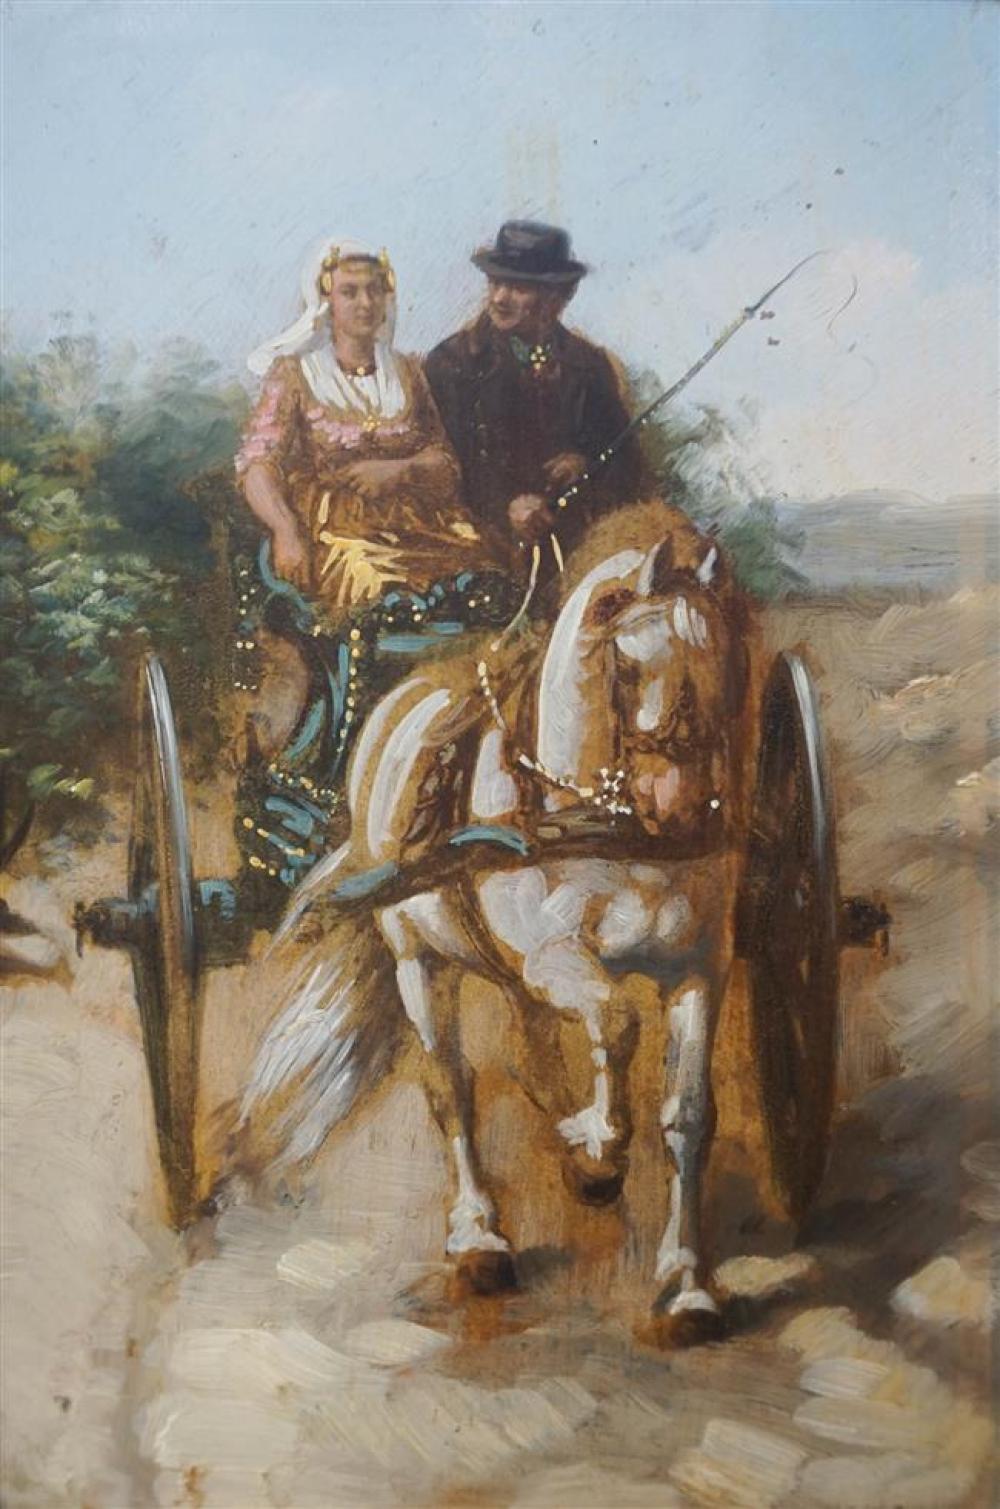 MAN AND WOMAN ON HORSE DRAWN CARRIAGE,